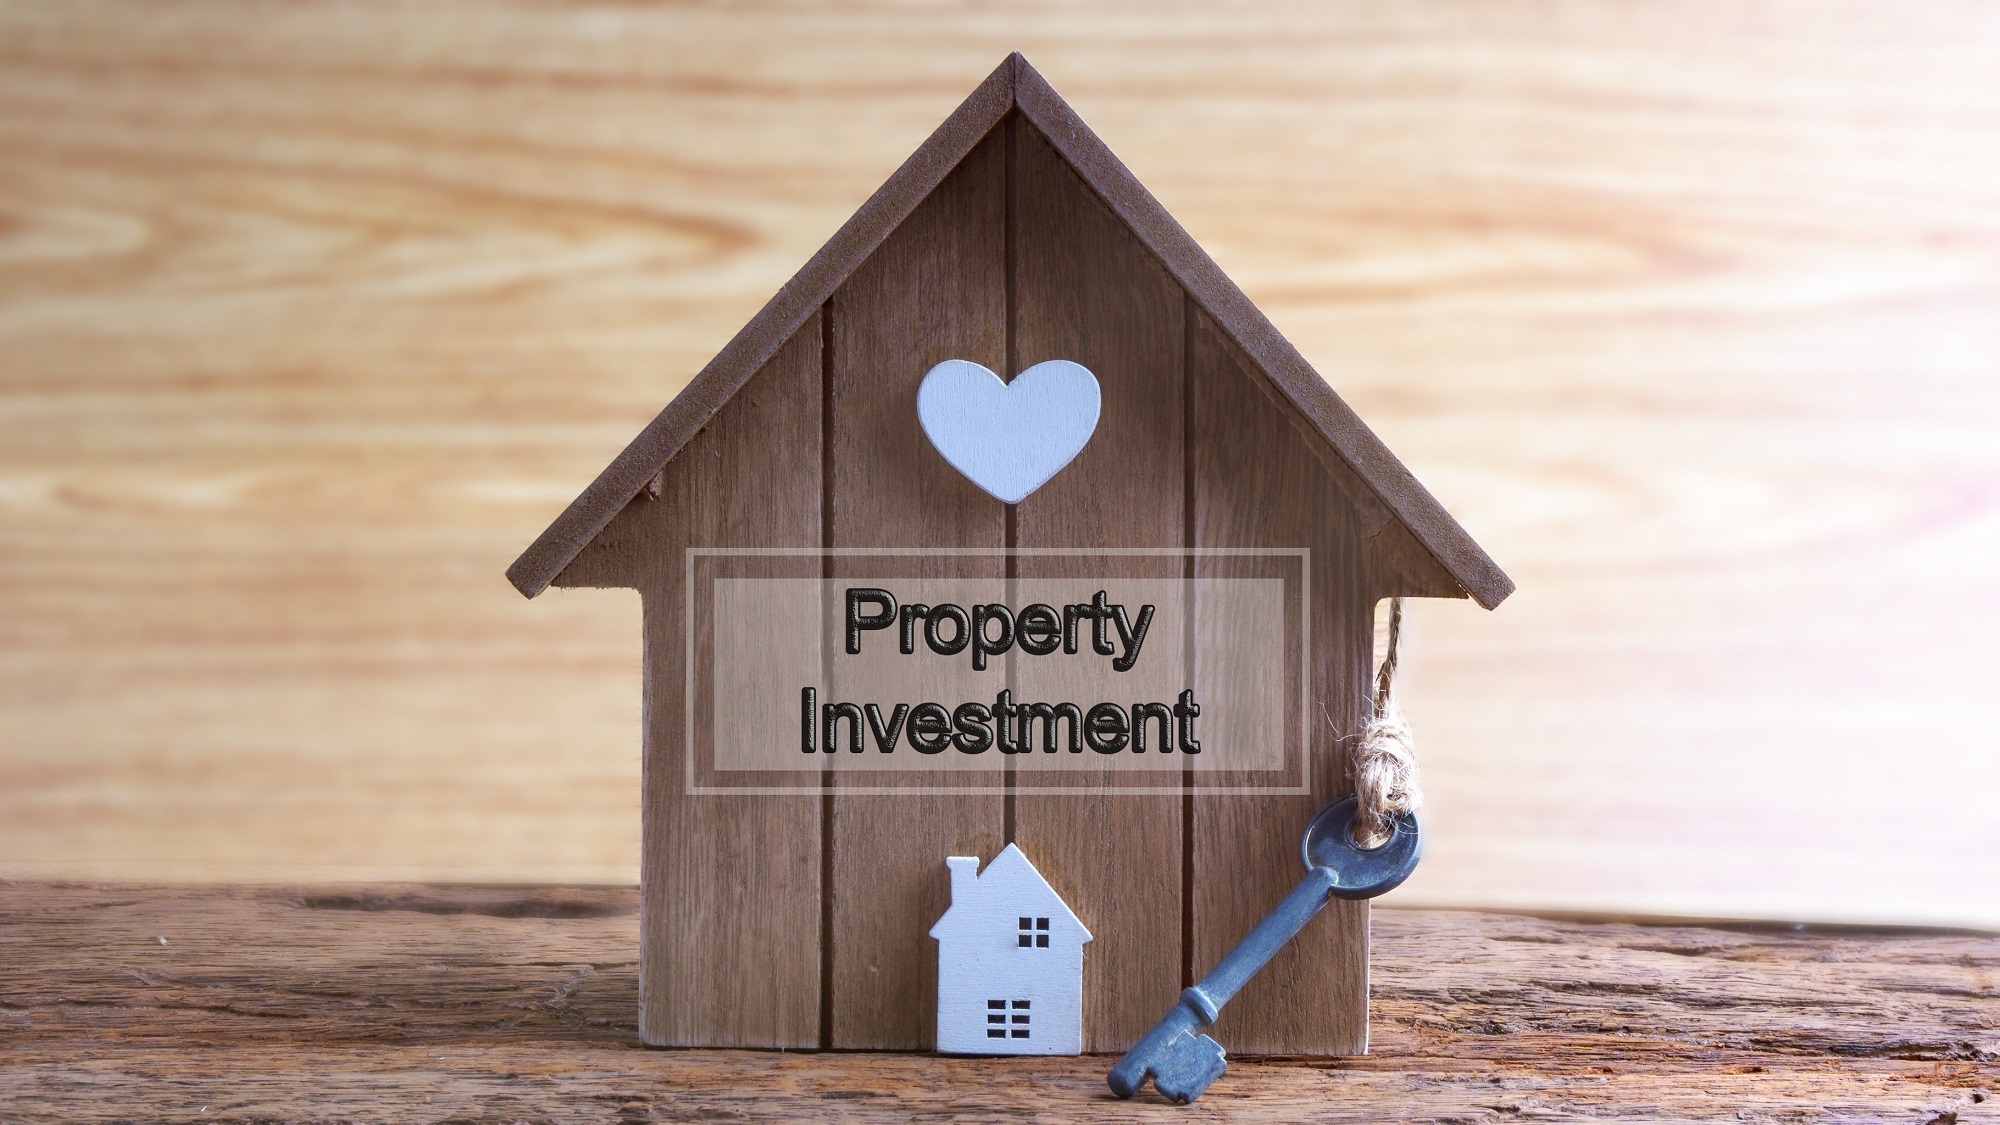 Investment Property Tips - 2020